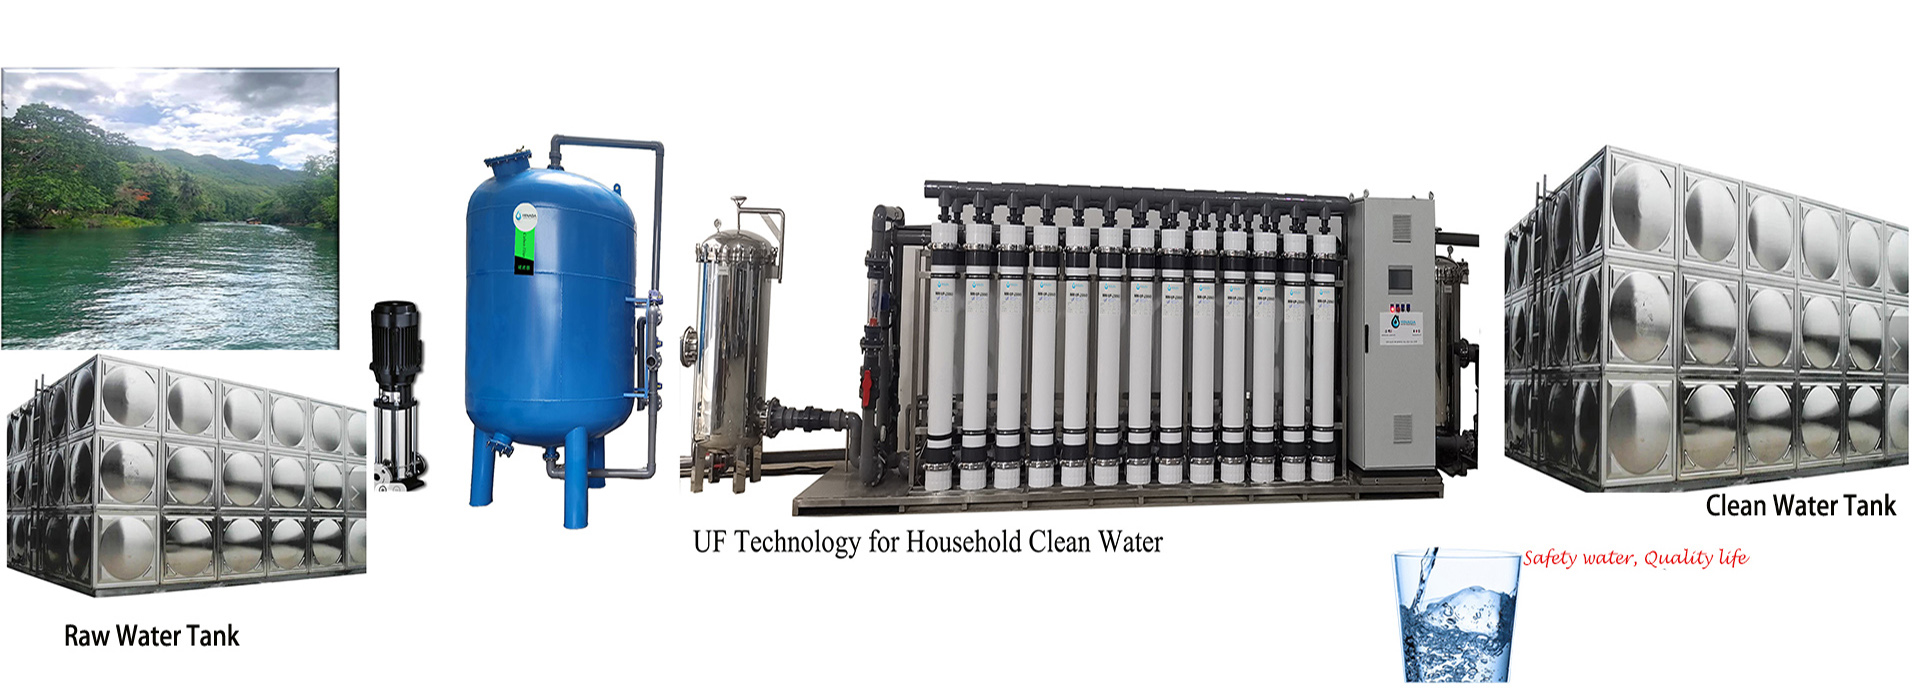 Looking for Potable Water Solutions?